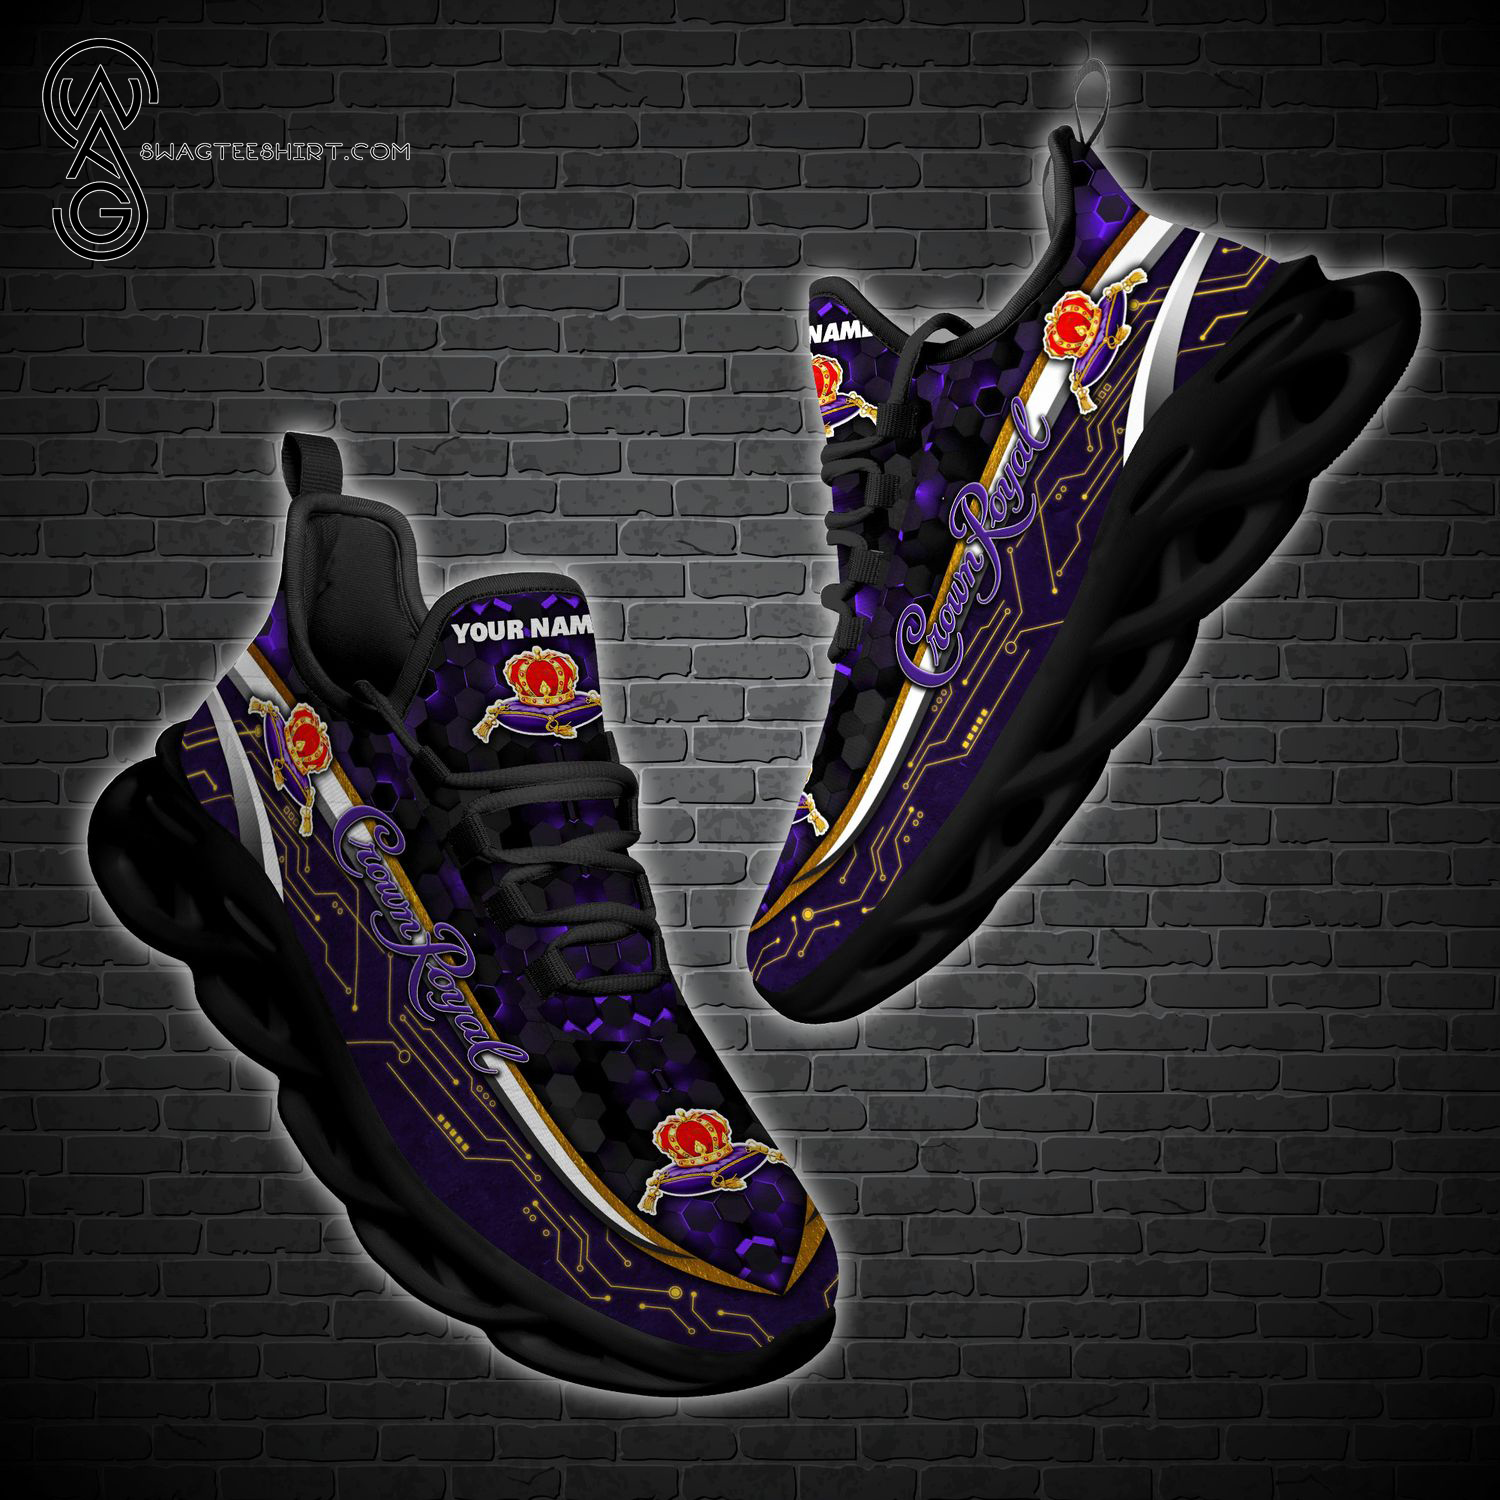 Custom Crown Royal Canadian Whisky Max Soul Shoes